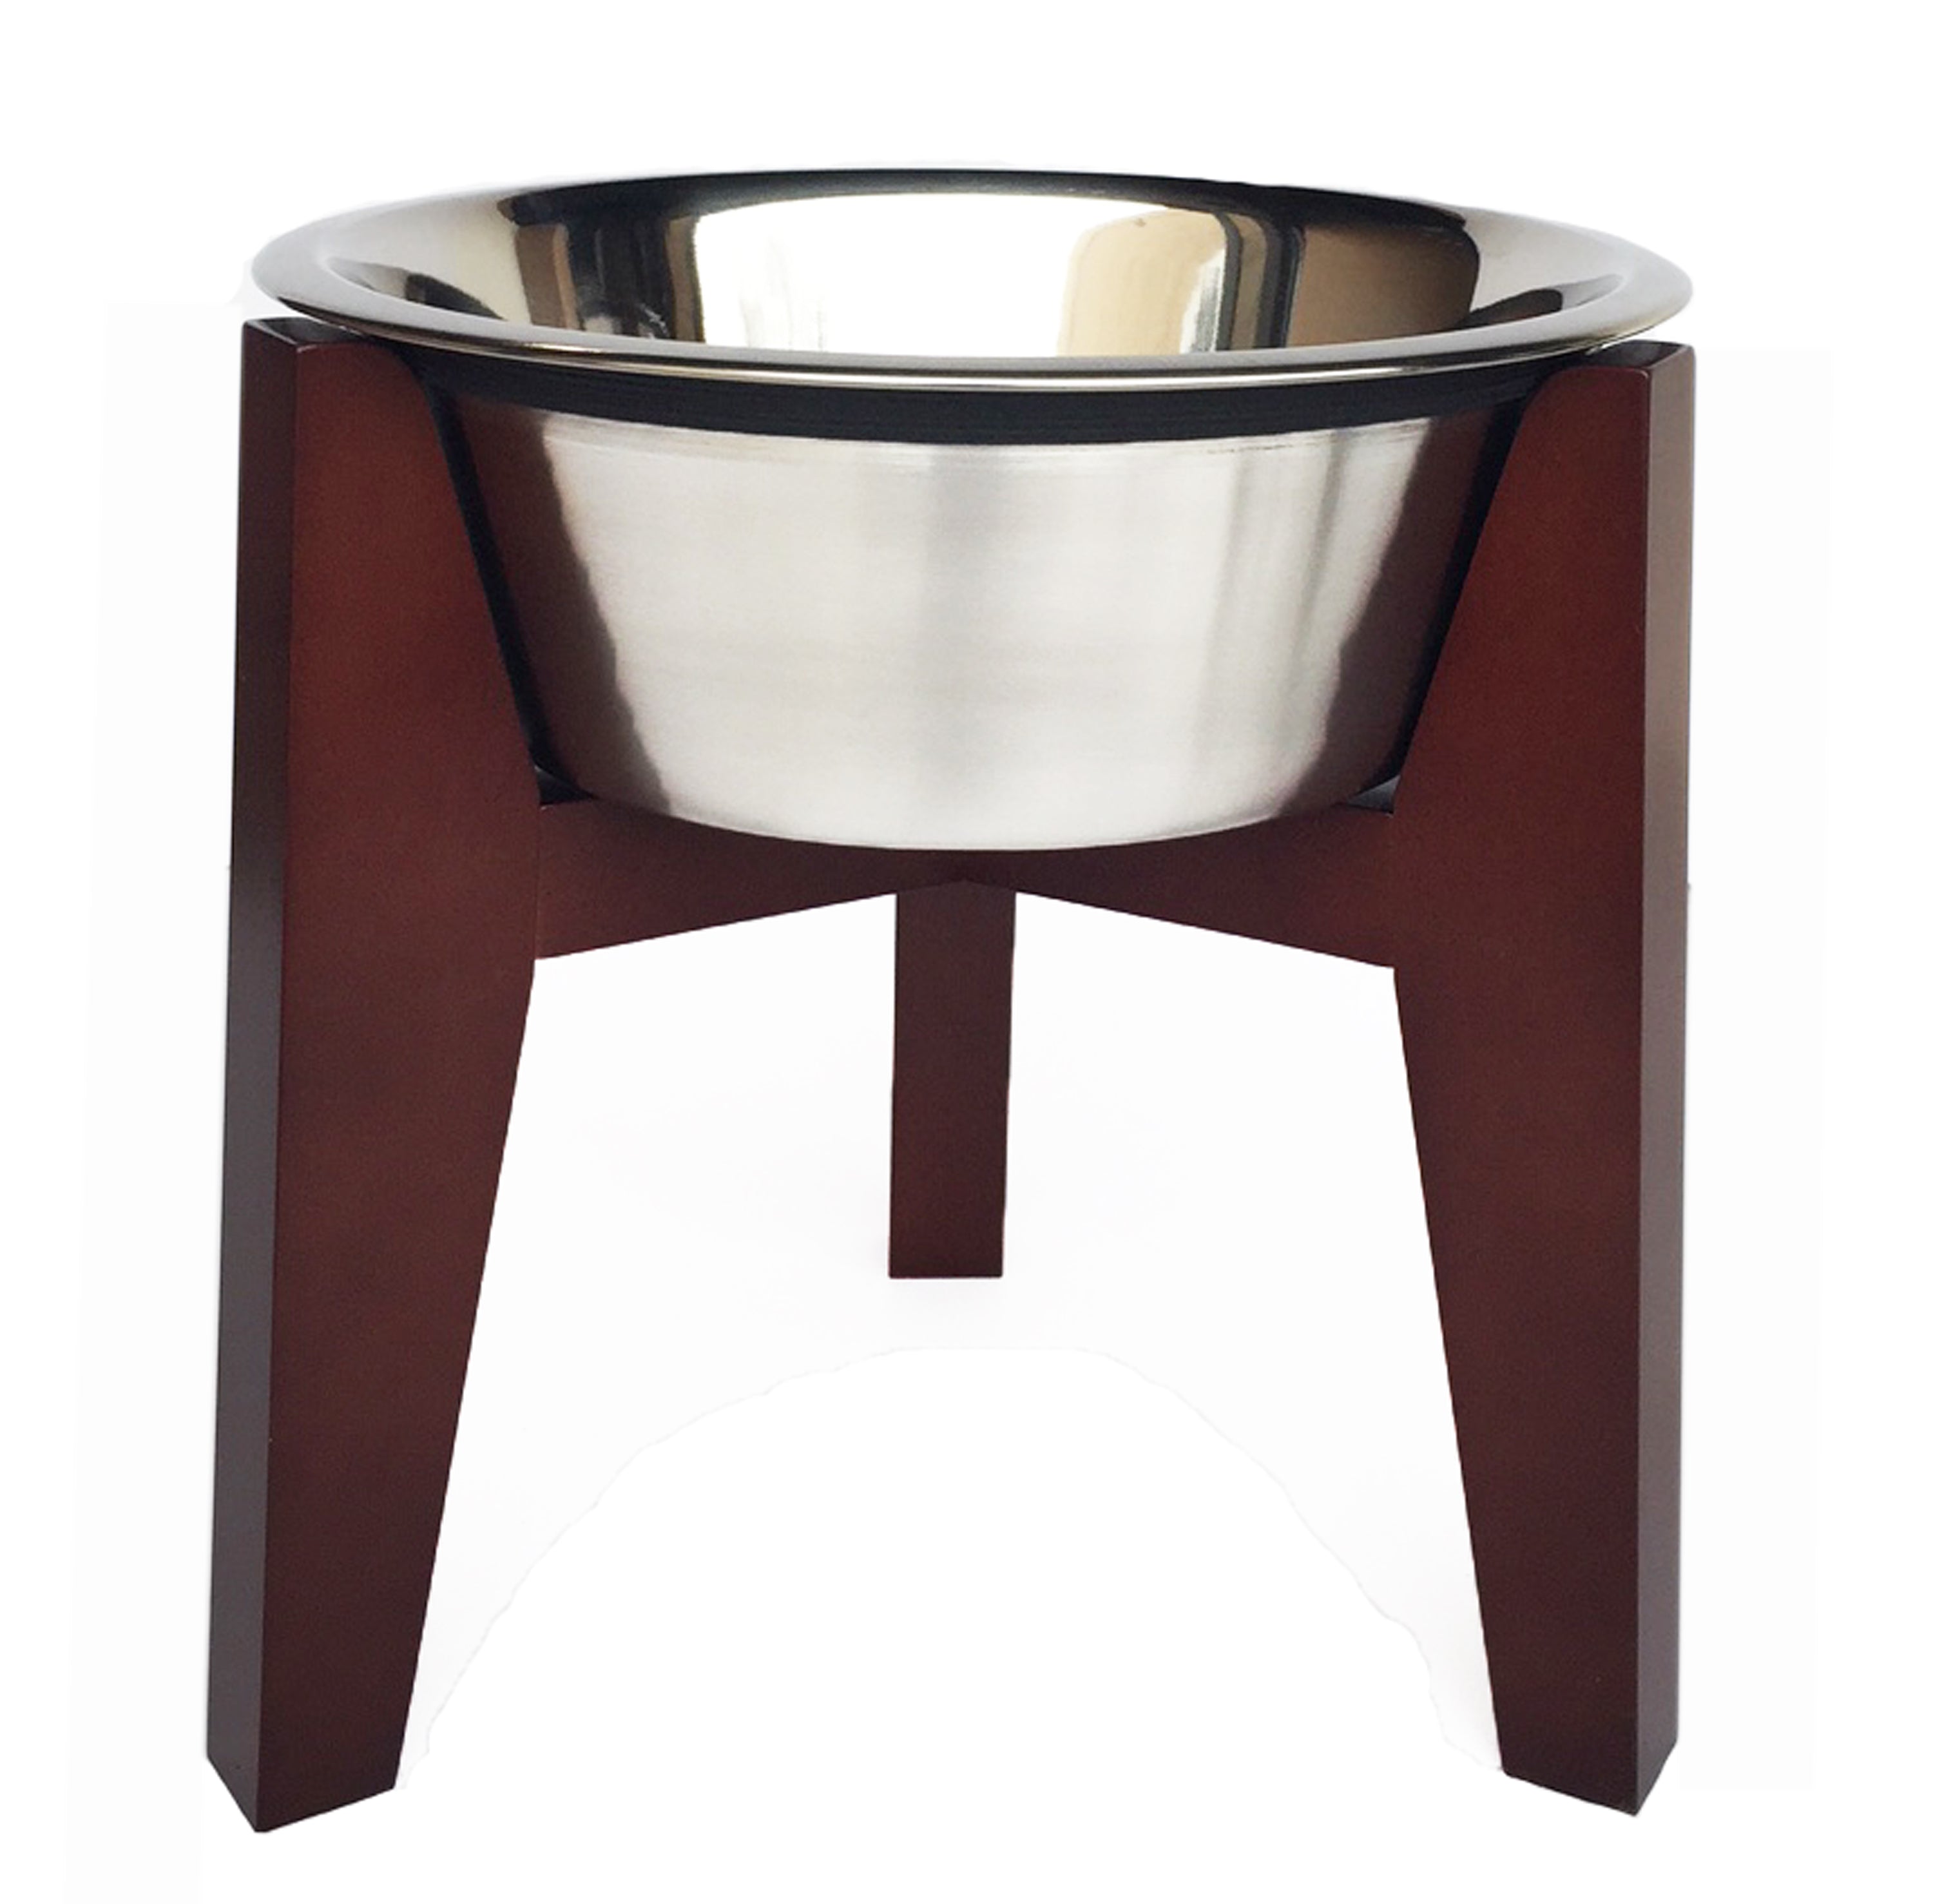 Walnut Mid Century Modern Elevated Dog Bowl Stand With Food Safe Finish and  Stainless Steel Bowls Included 